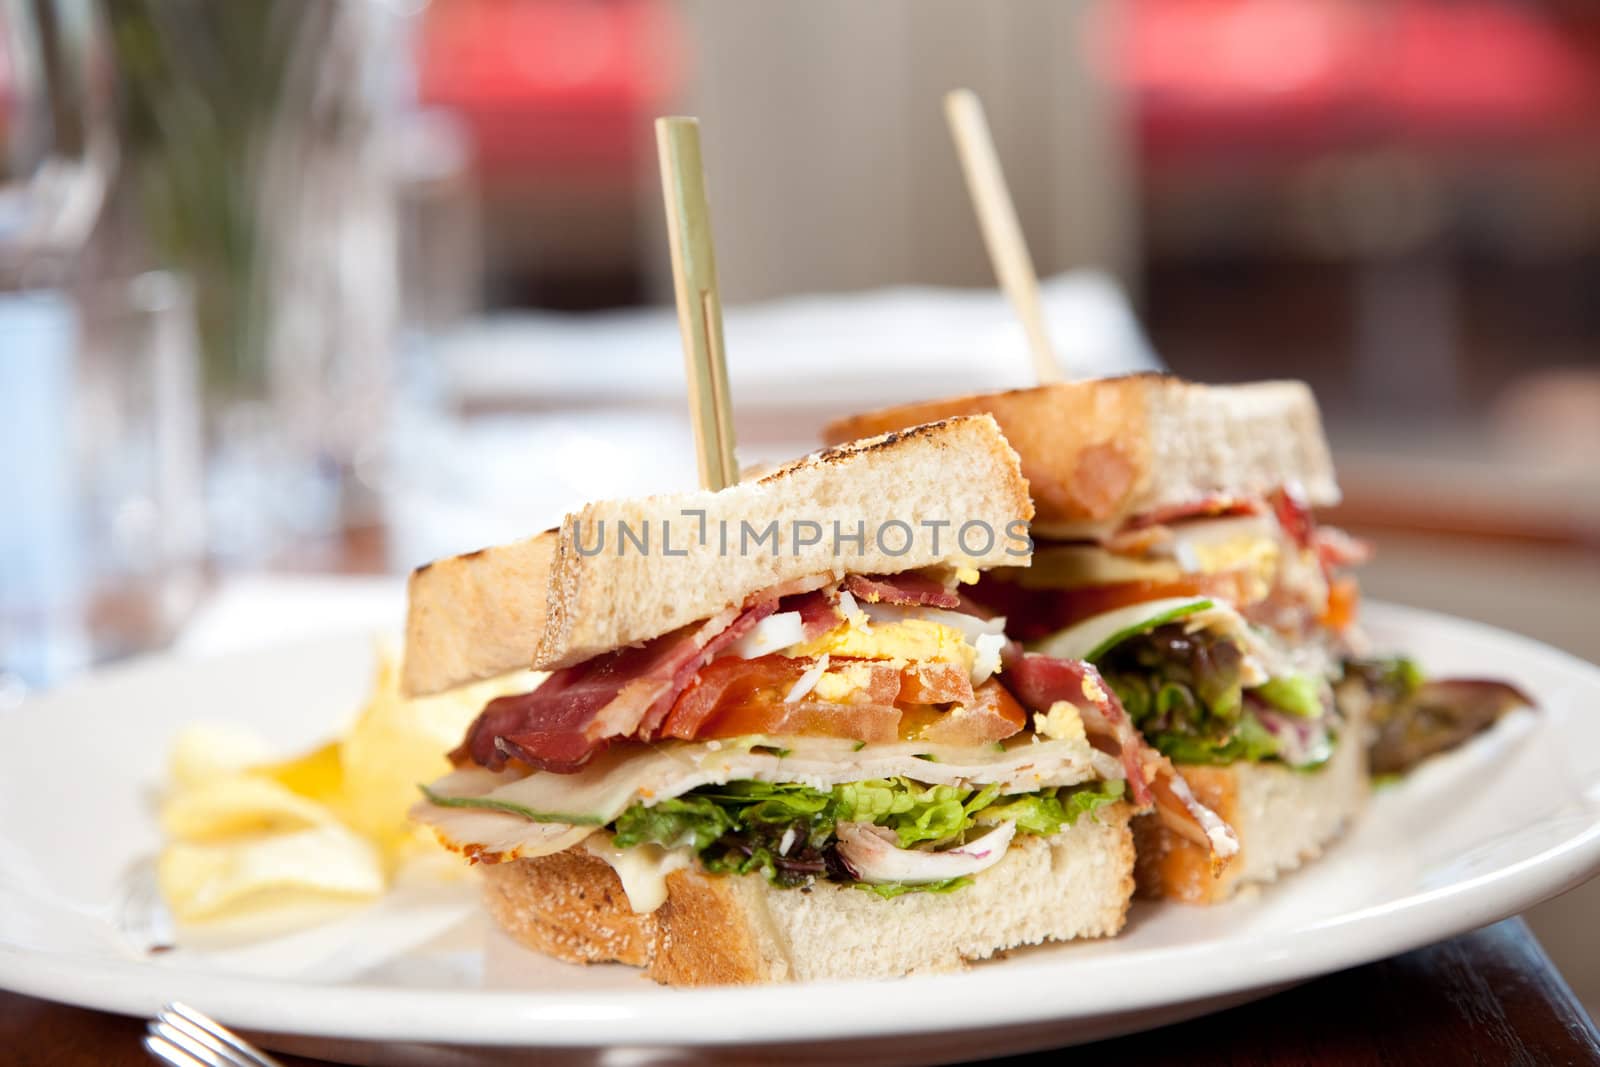 Delicious clubsandwich with toasted bread, bacon, egg, and chips